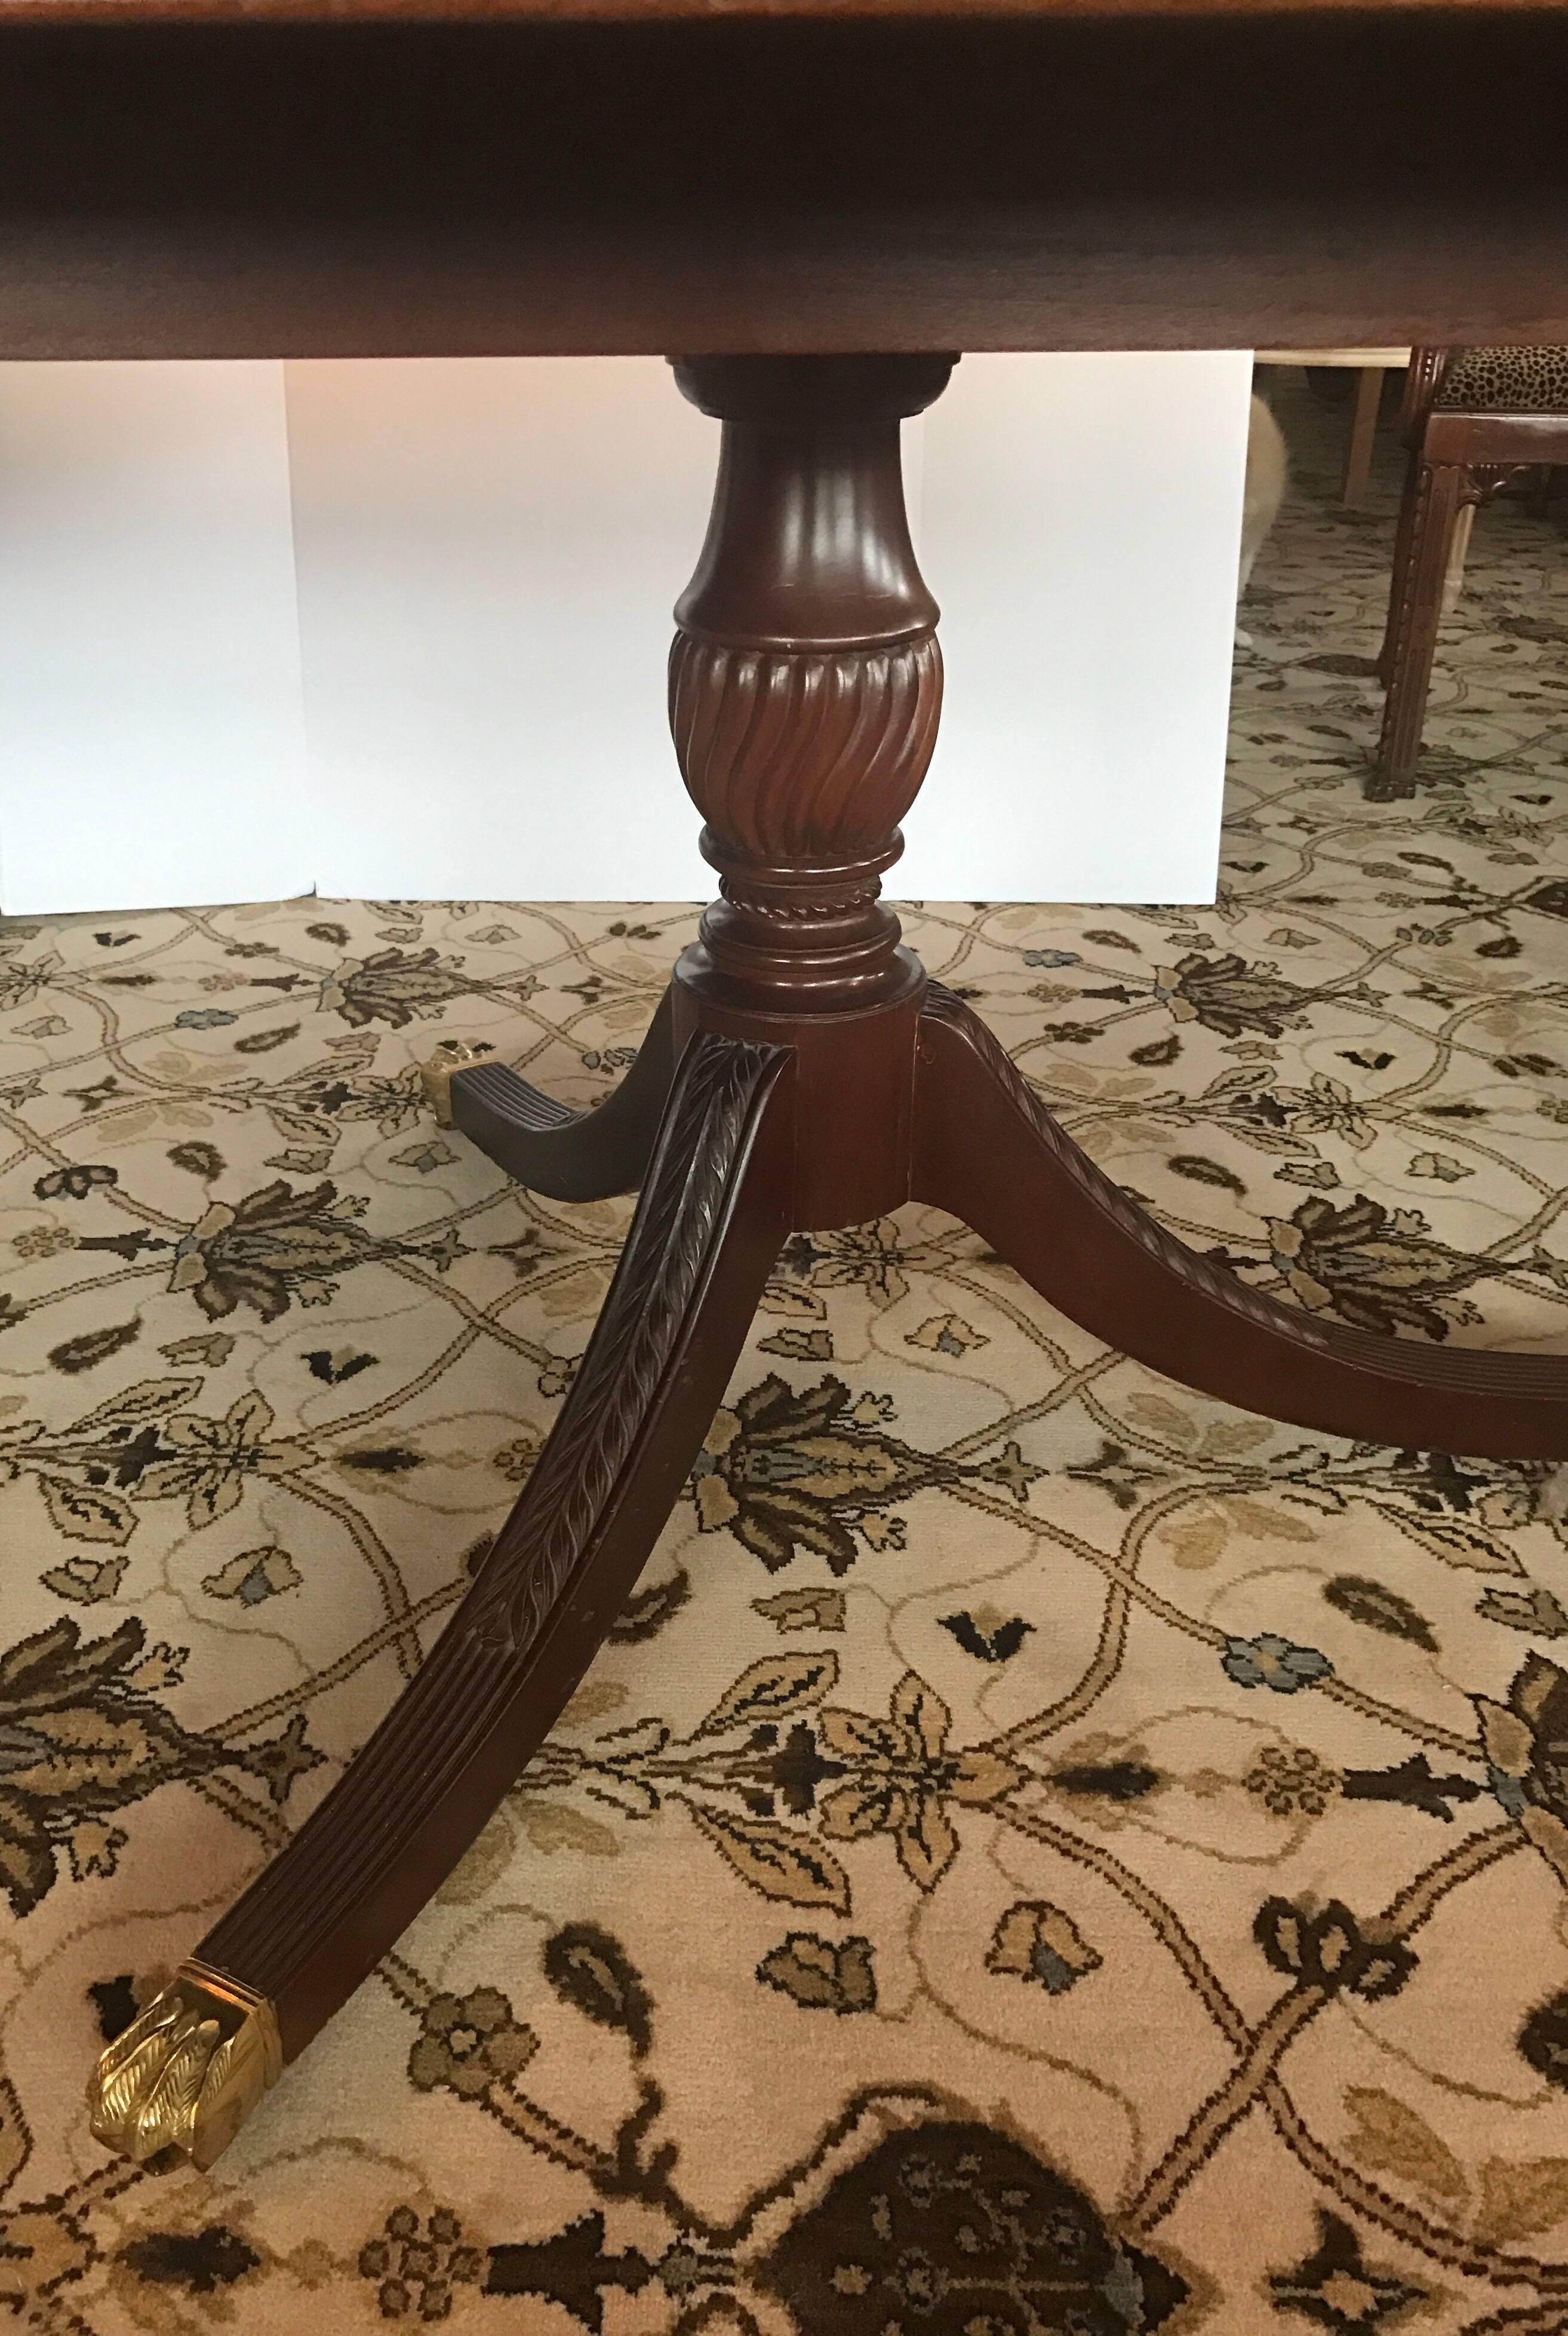 Magnificent English double pedestal dining room table with banded satinwood inlay around perimeter and brass lion feet on carved double pedestals. Table is shown with one leaf which seats ten. When both leaves are in, 12 fit comfortably. Each leaf